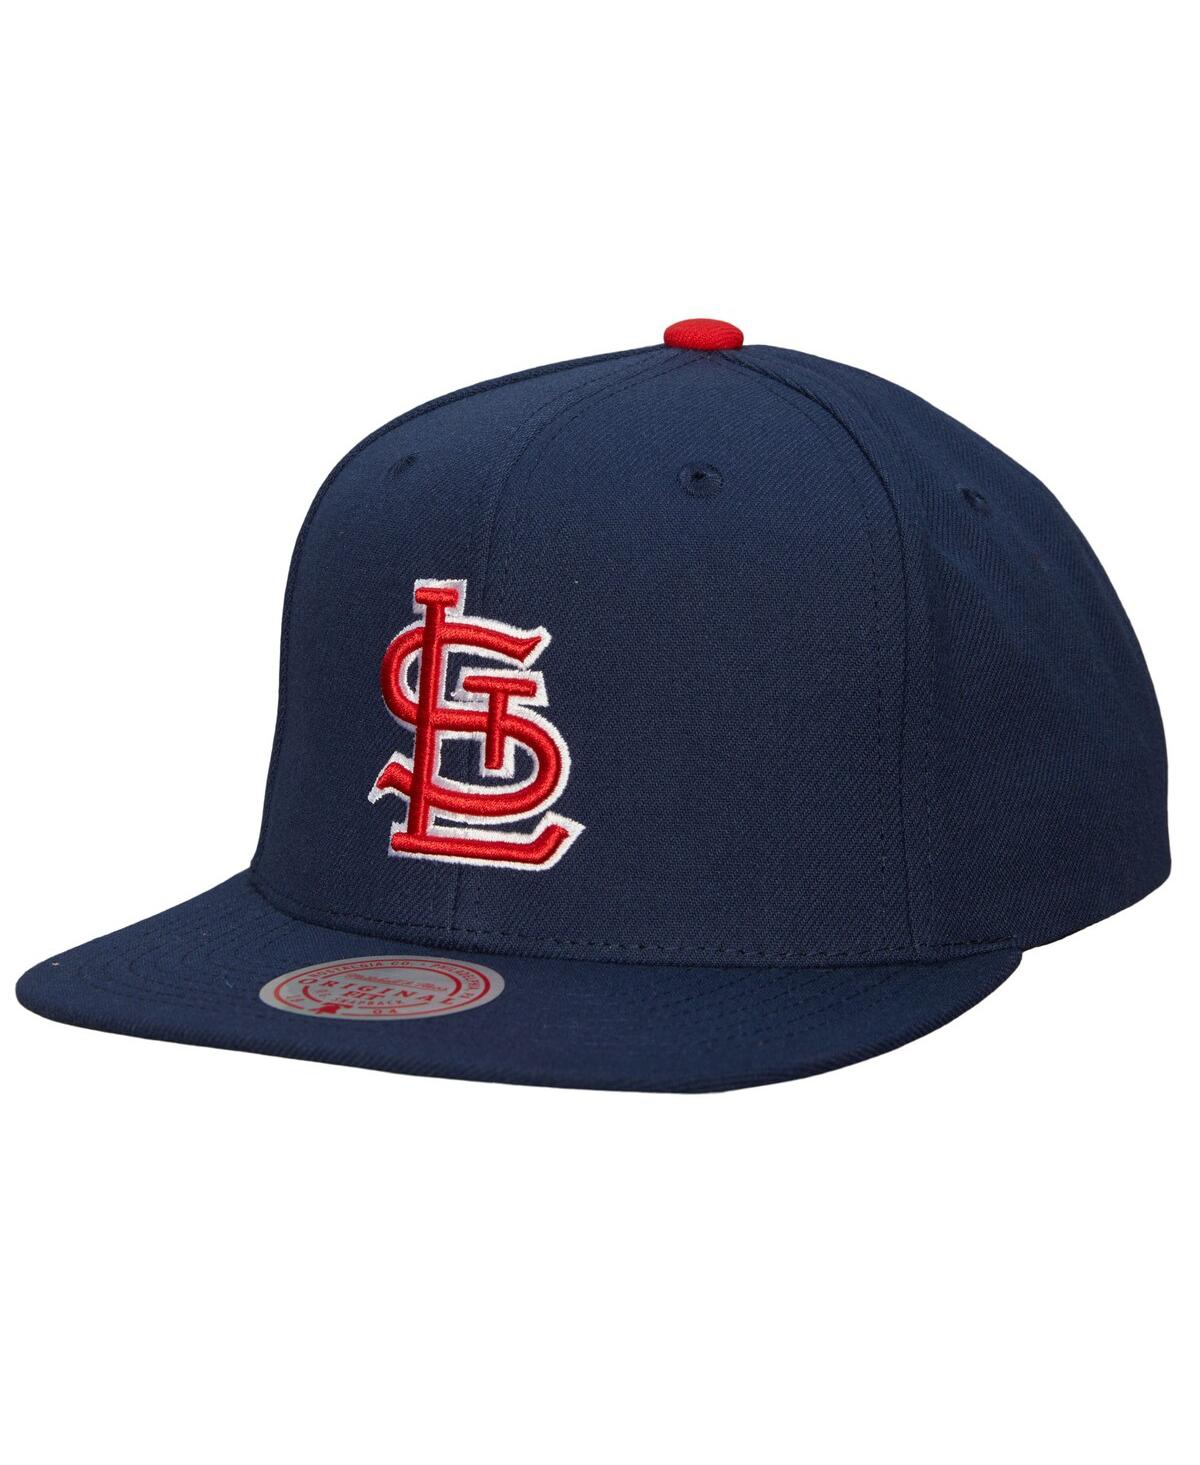 Mitchell & Ness Men's  Navy St. Louis Cardinals Cooperstown Collection Evergreen Snapback Hat